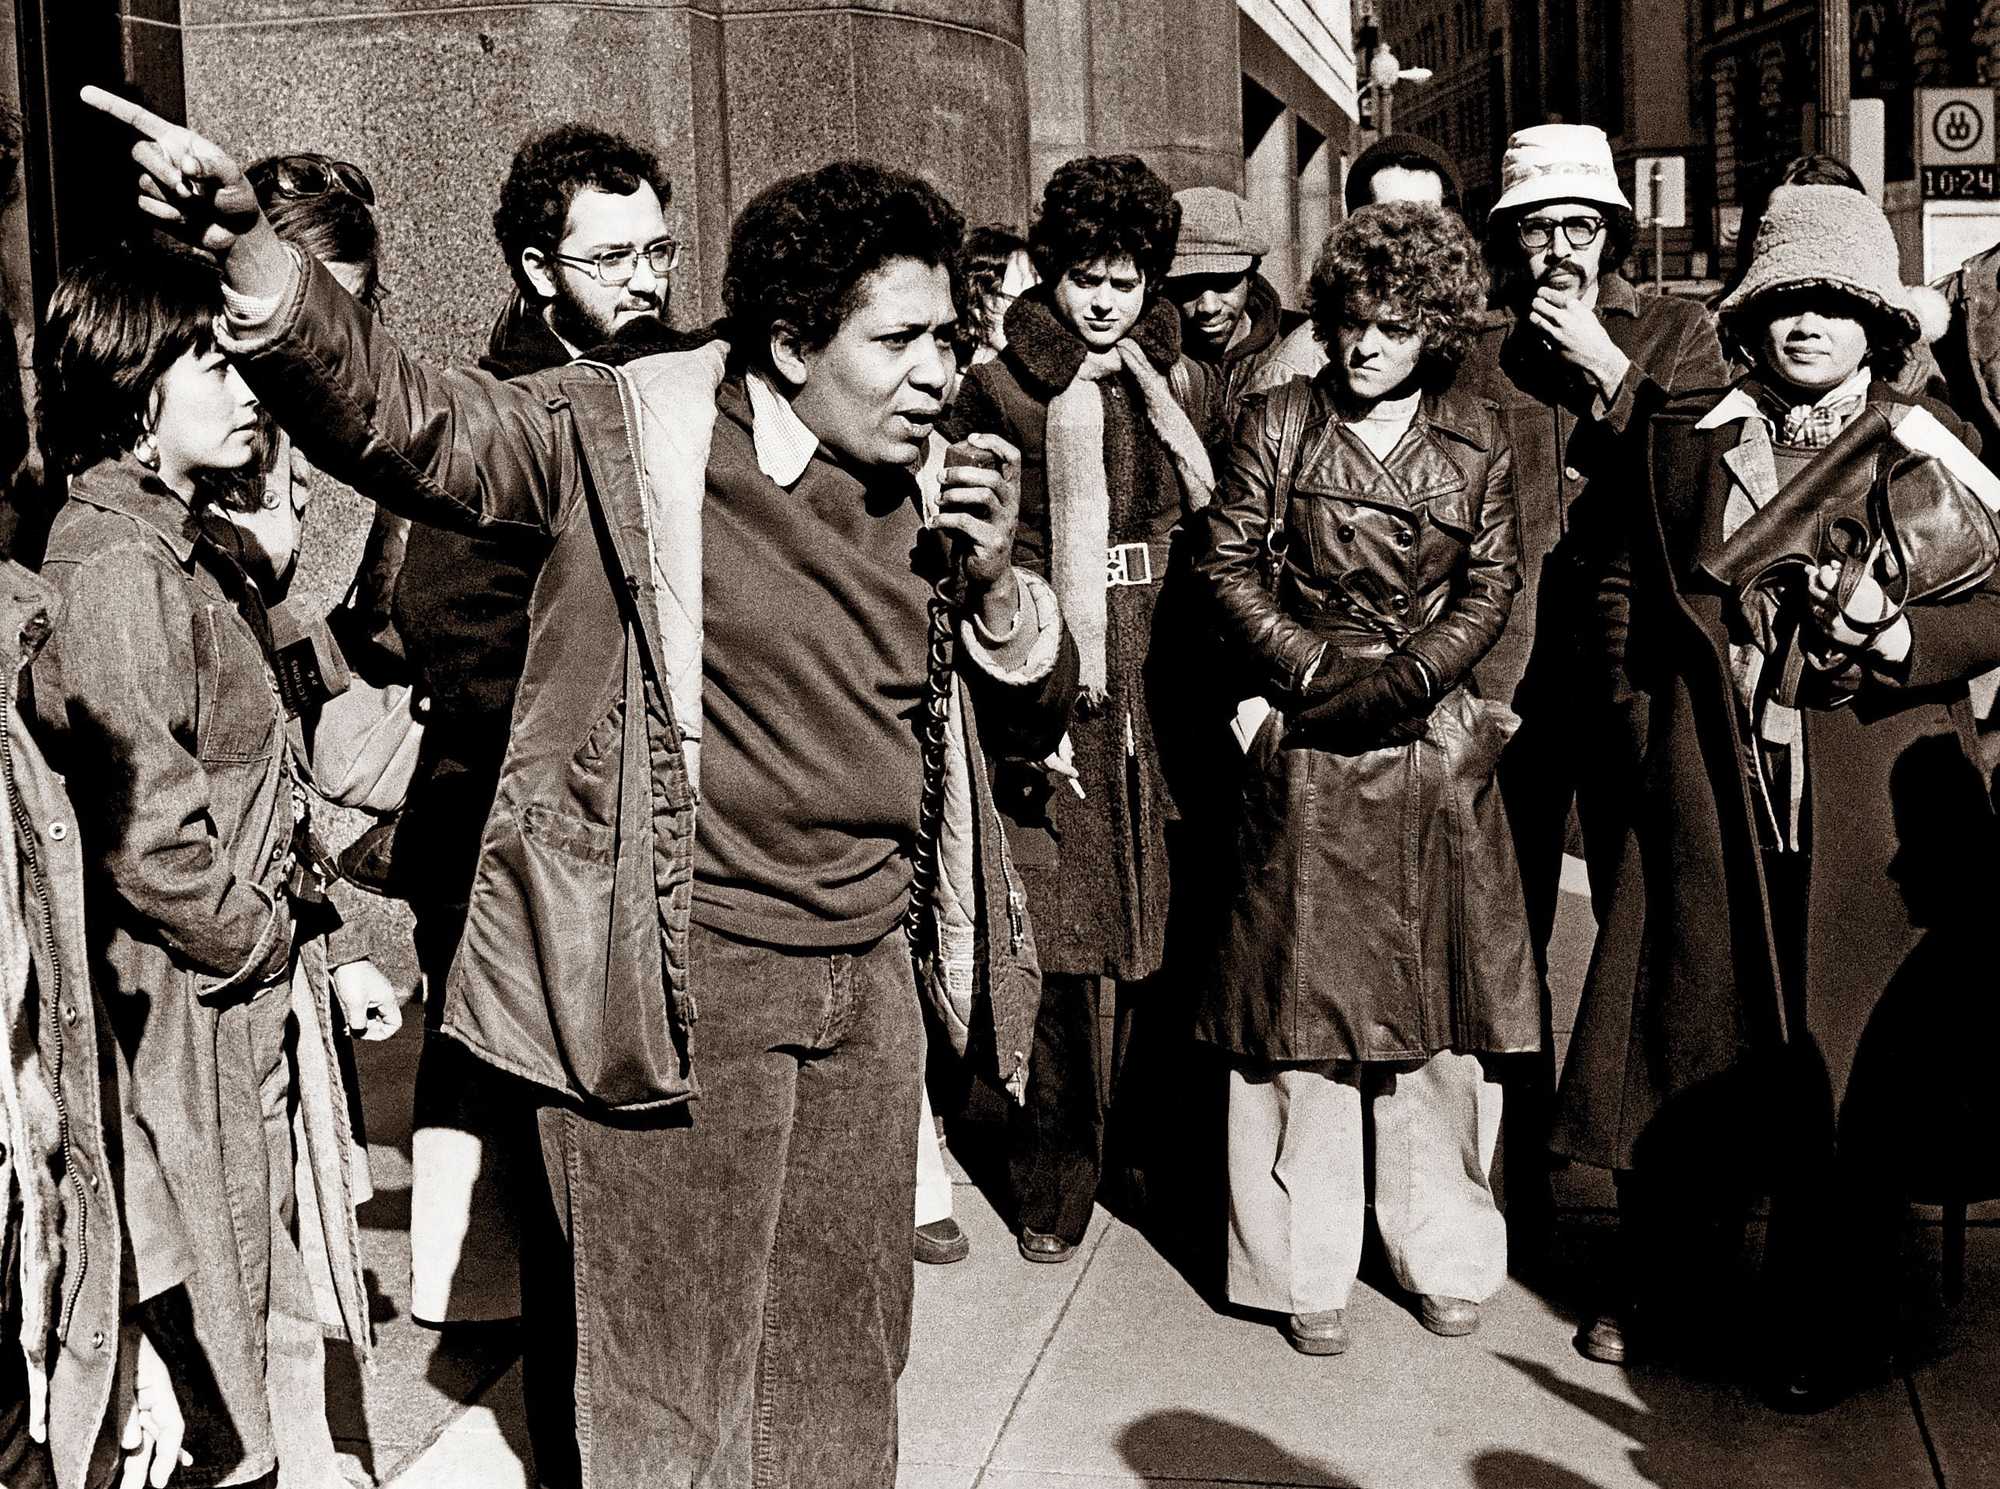 Daisy Diaz, spokesperson for the Comité de Padres, spoke to a crowd gathered outside of the US District Court in 1976. Diaz addressed those at the courthouse after US Judge W. Arthur Garrity Jr. had denounced the city's lack of financial support for the schools as students and families struggled to adapt to desegregation.